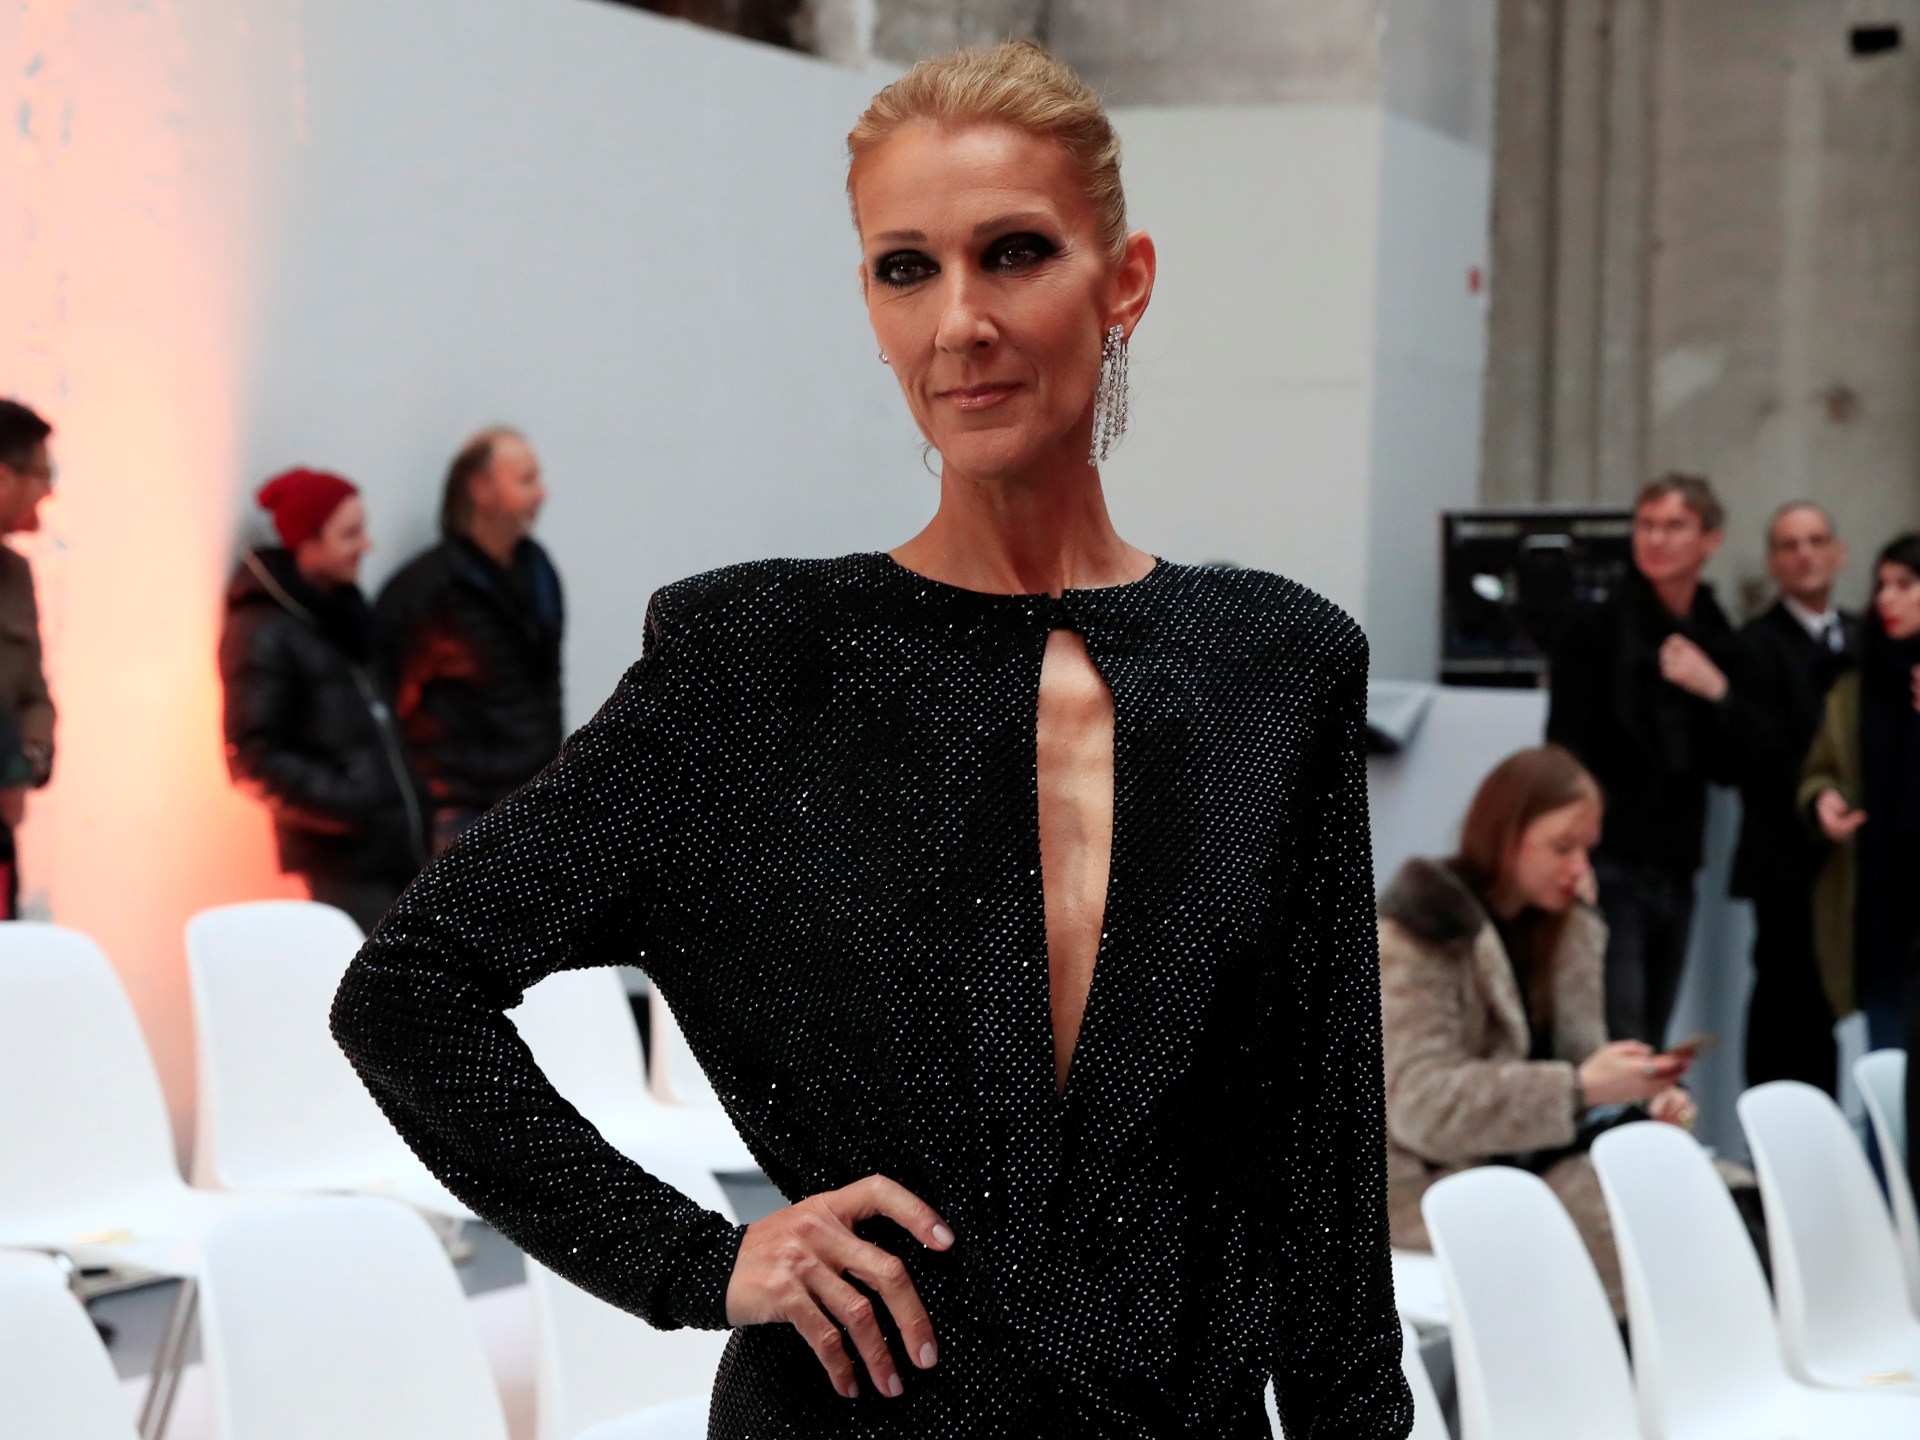 Celine Dion cancels the 2023-24 shows due to health problems | music news